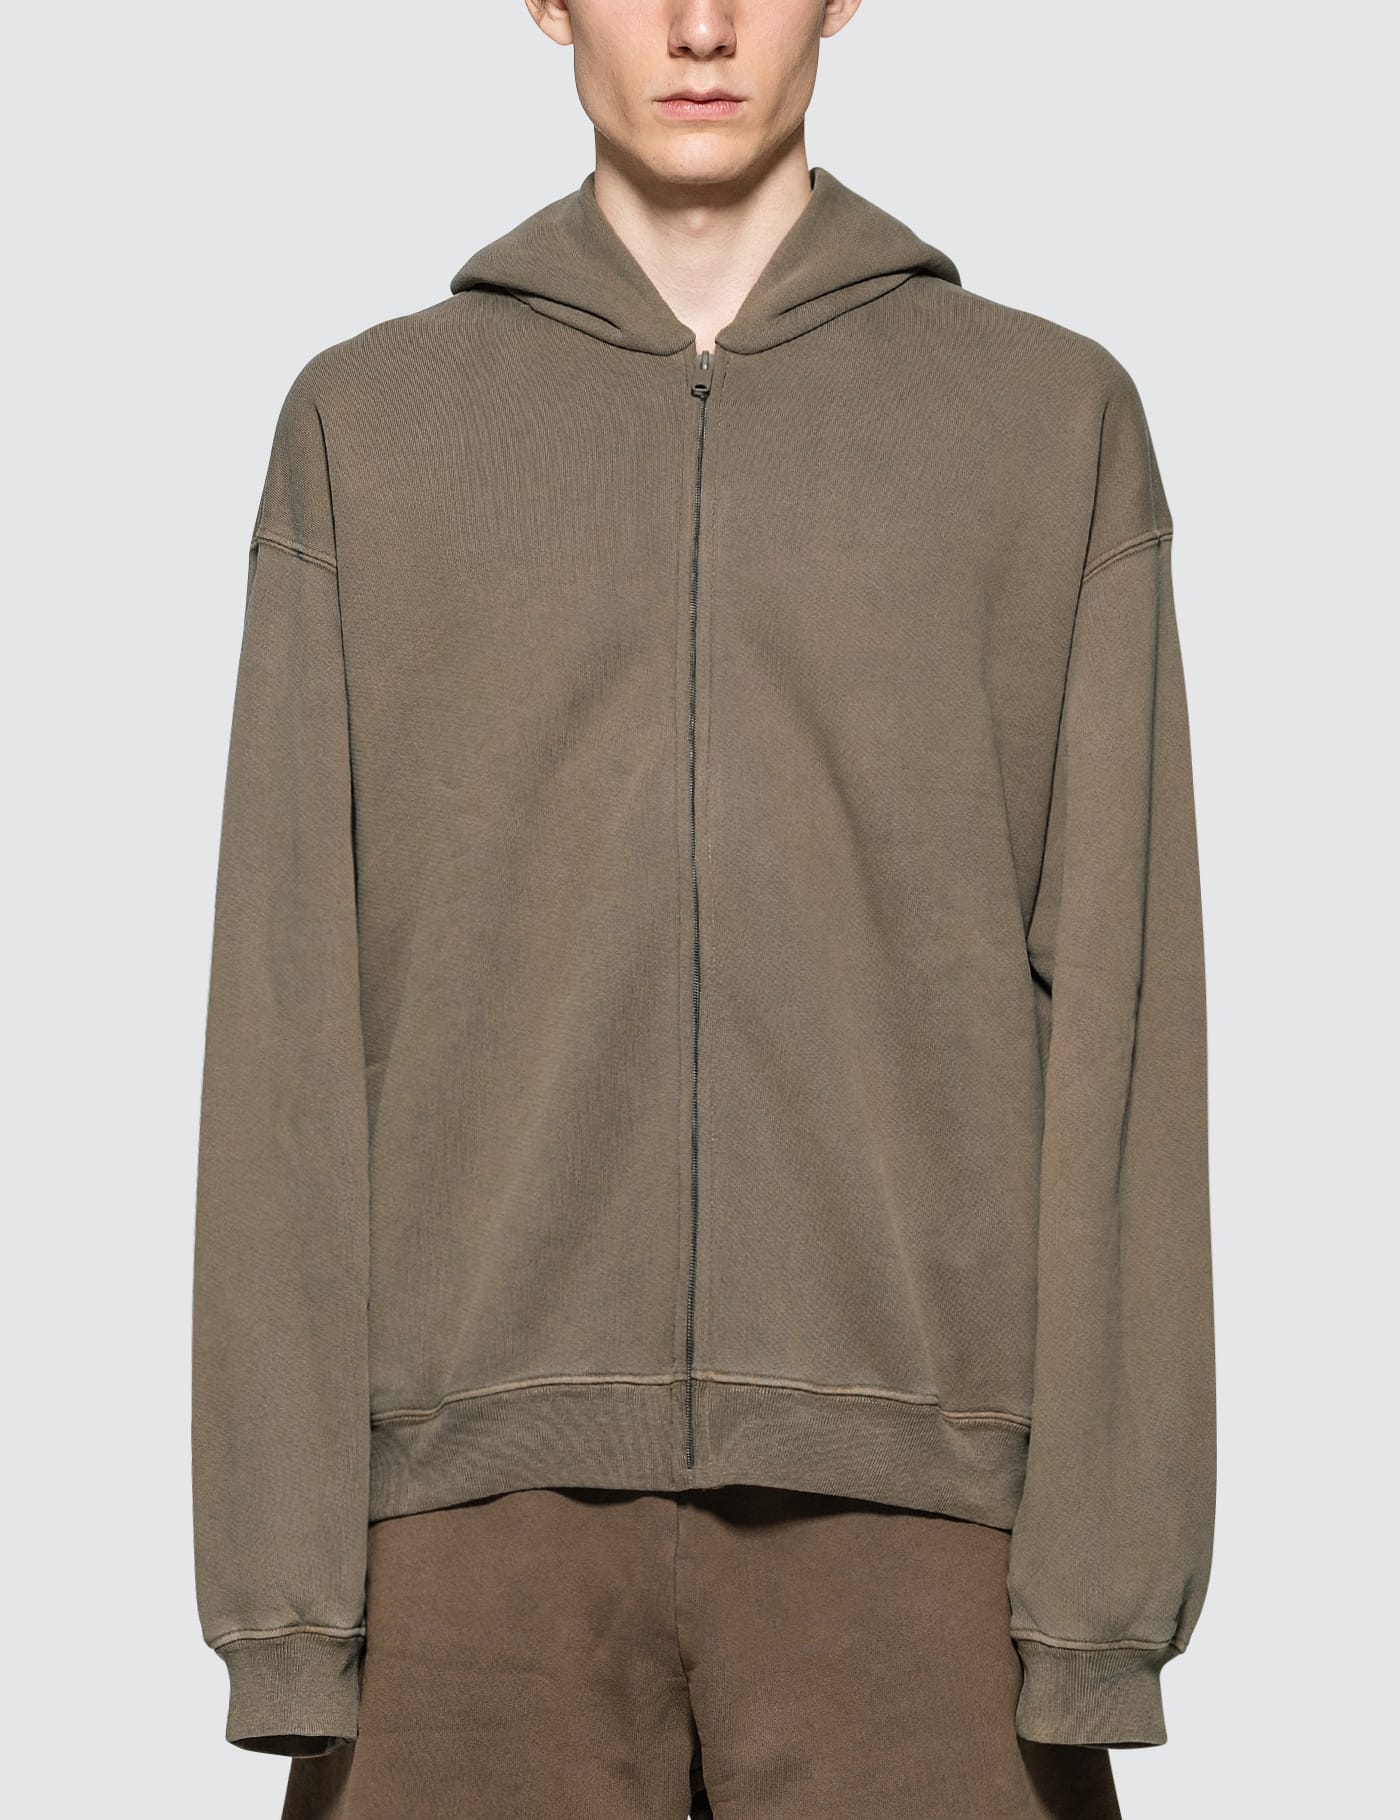 Yeezy - Zip Up Hoodie | HBX - Globally Curated Fashion and 